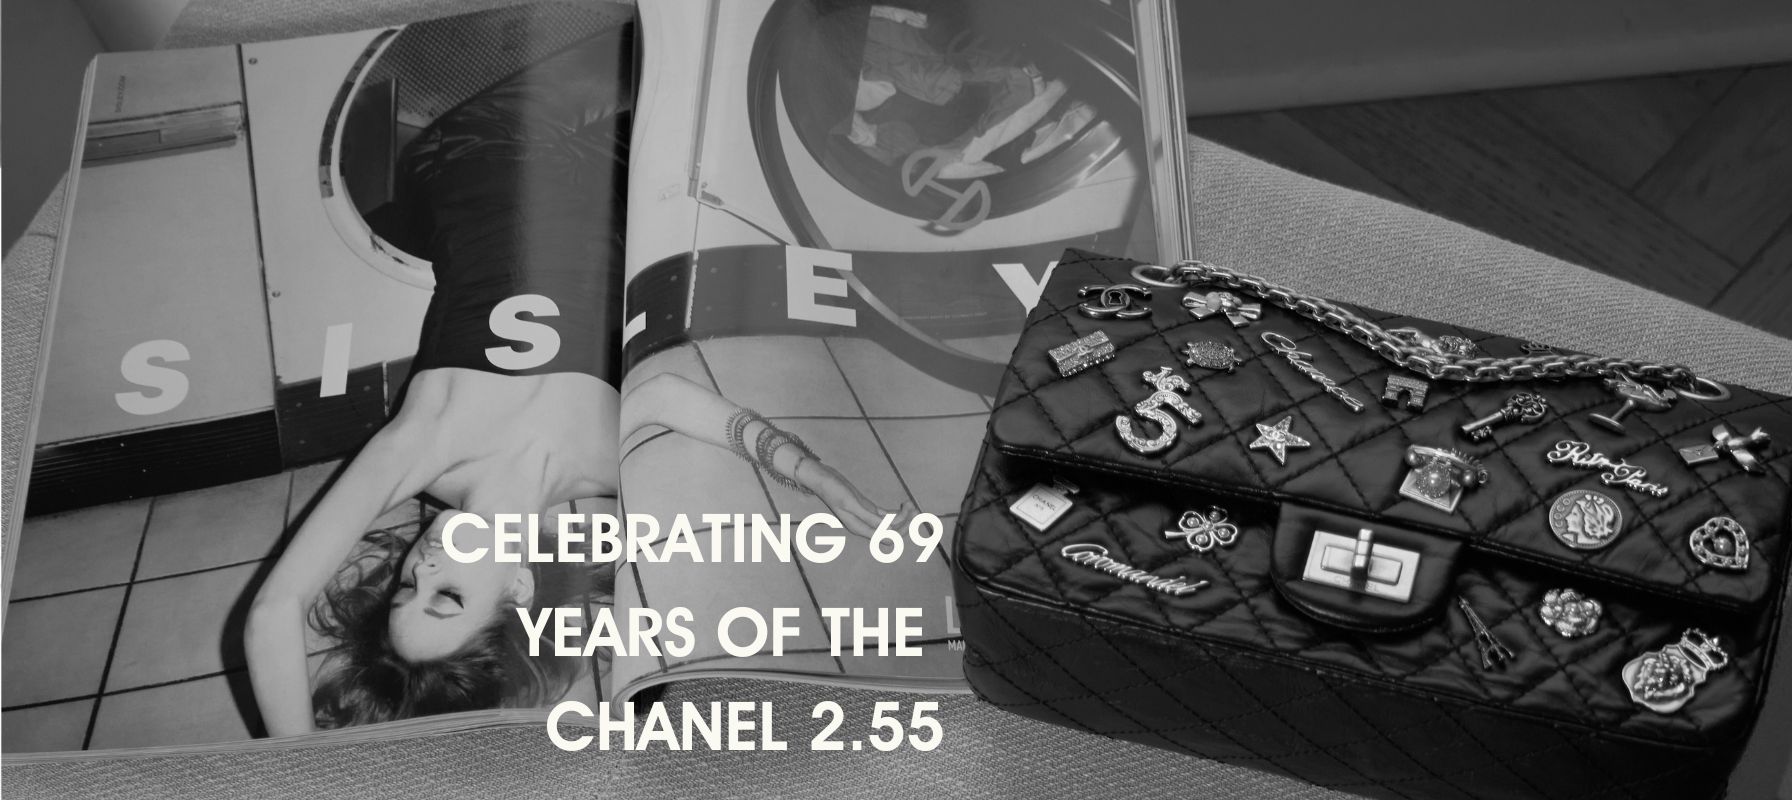 Celebrating 69 Years of the Chanel 2.55 | The Handbag Clinic